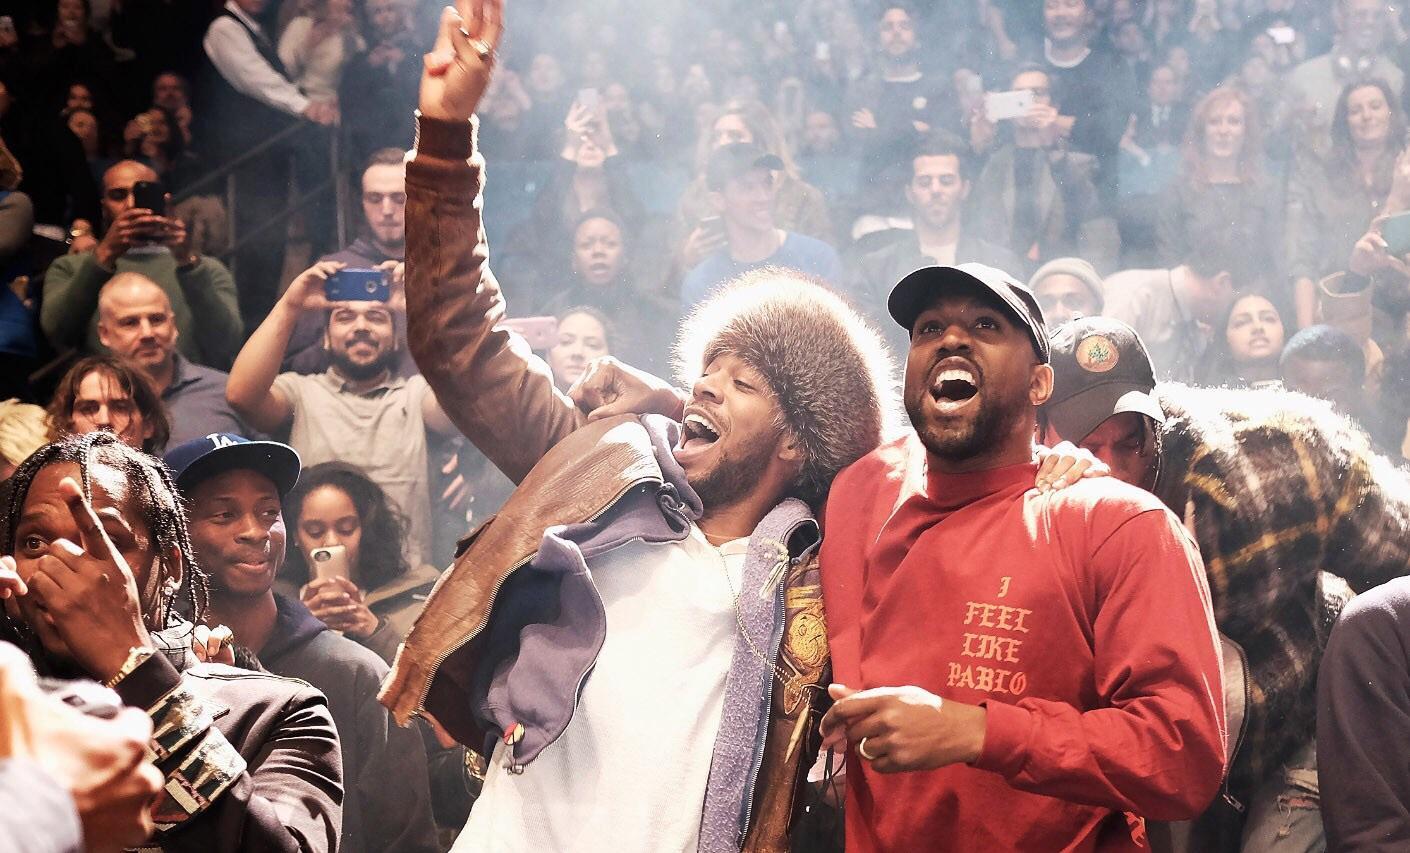 This will forever be my desktop wallpaper no matter what rKanye